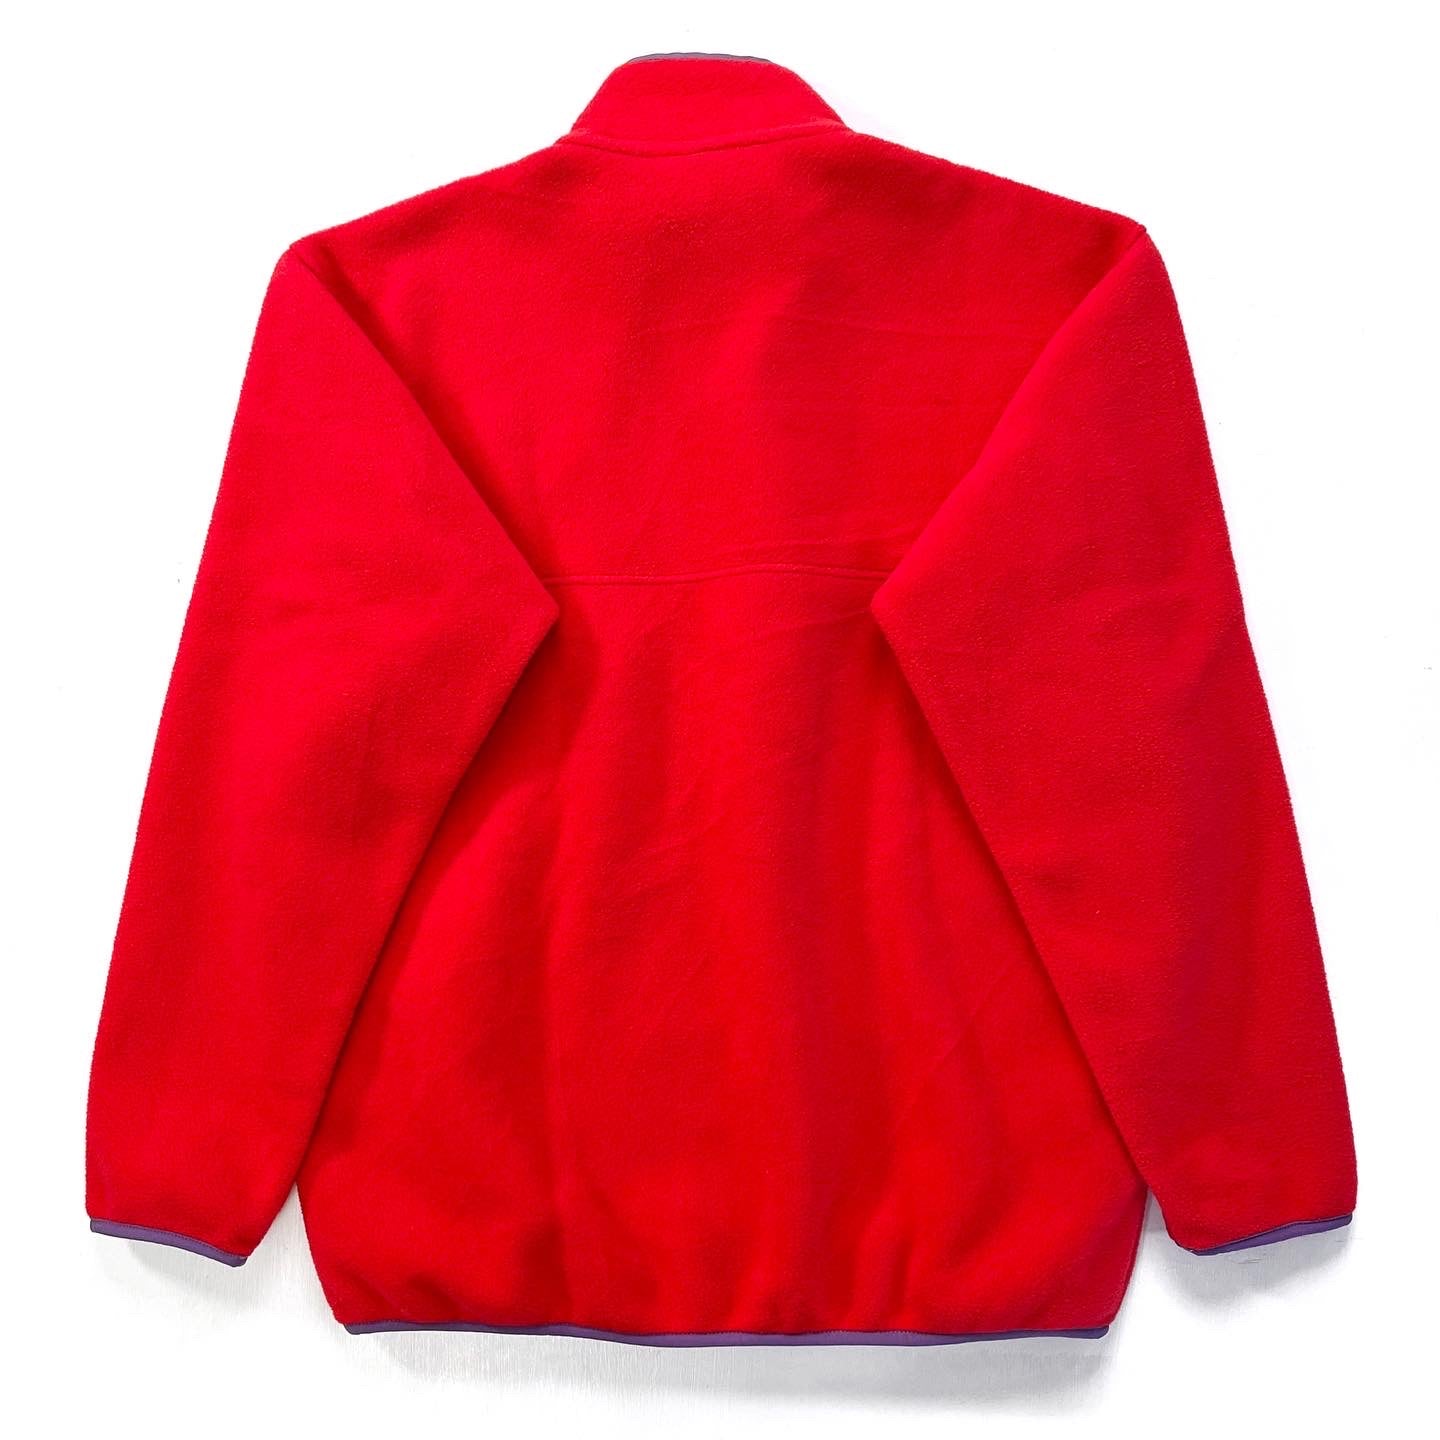 2008 Patagonia X Urban Outfitters Synchilla Cardigan, Bright Red (XL)